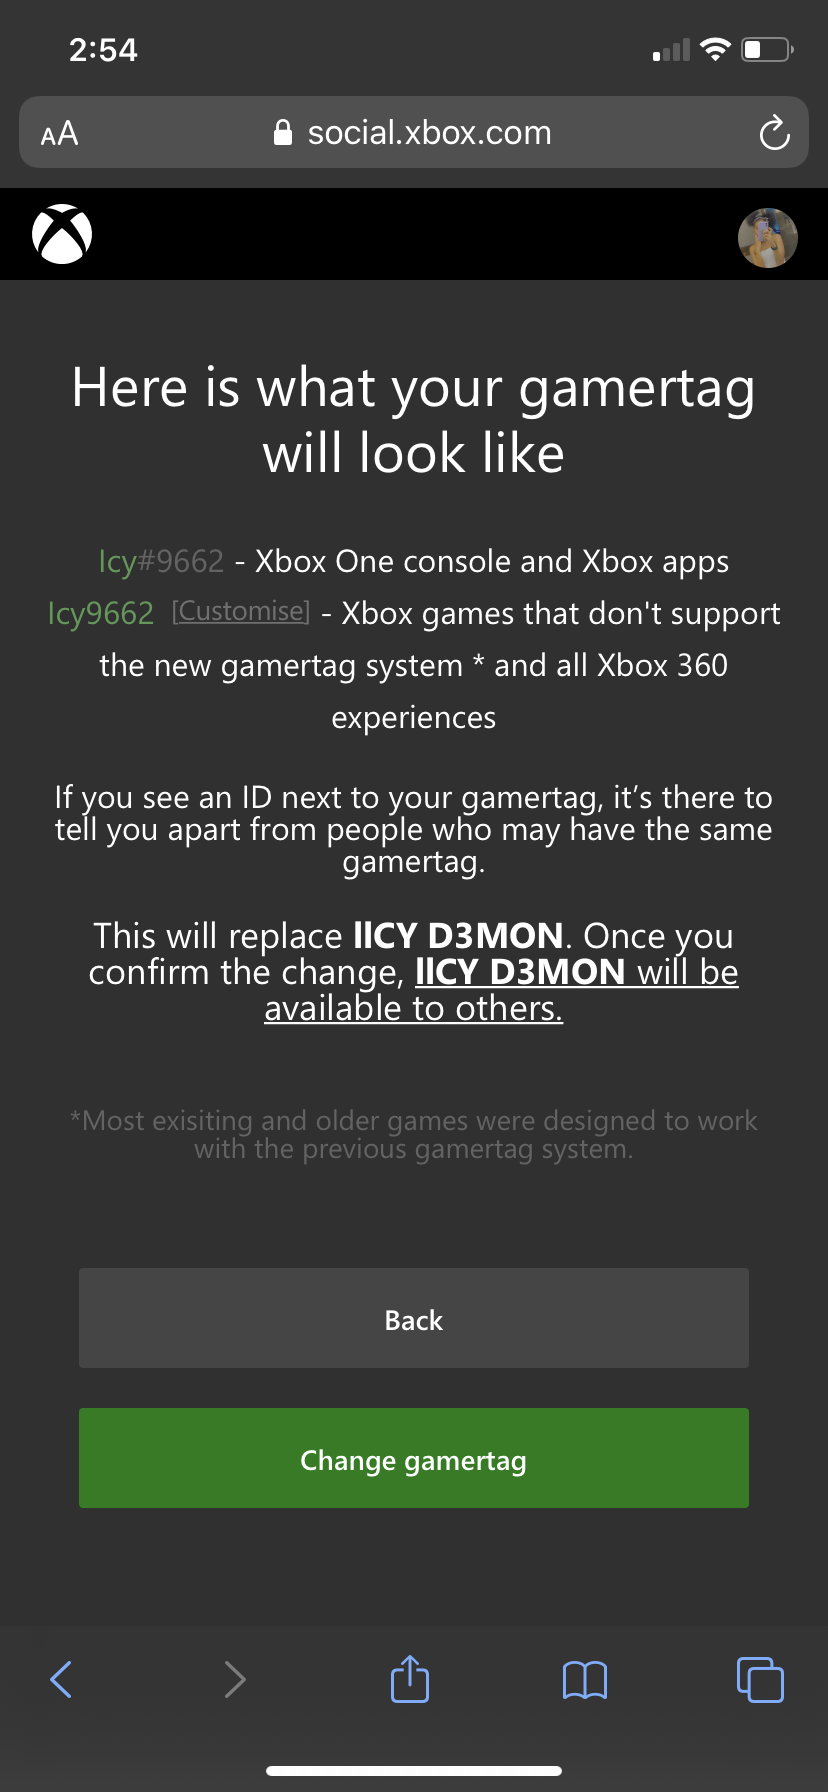 What's a gamertag? - Microsoft Support